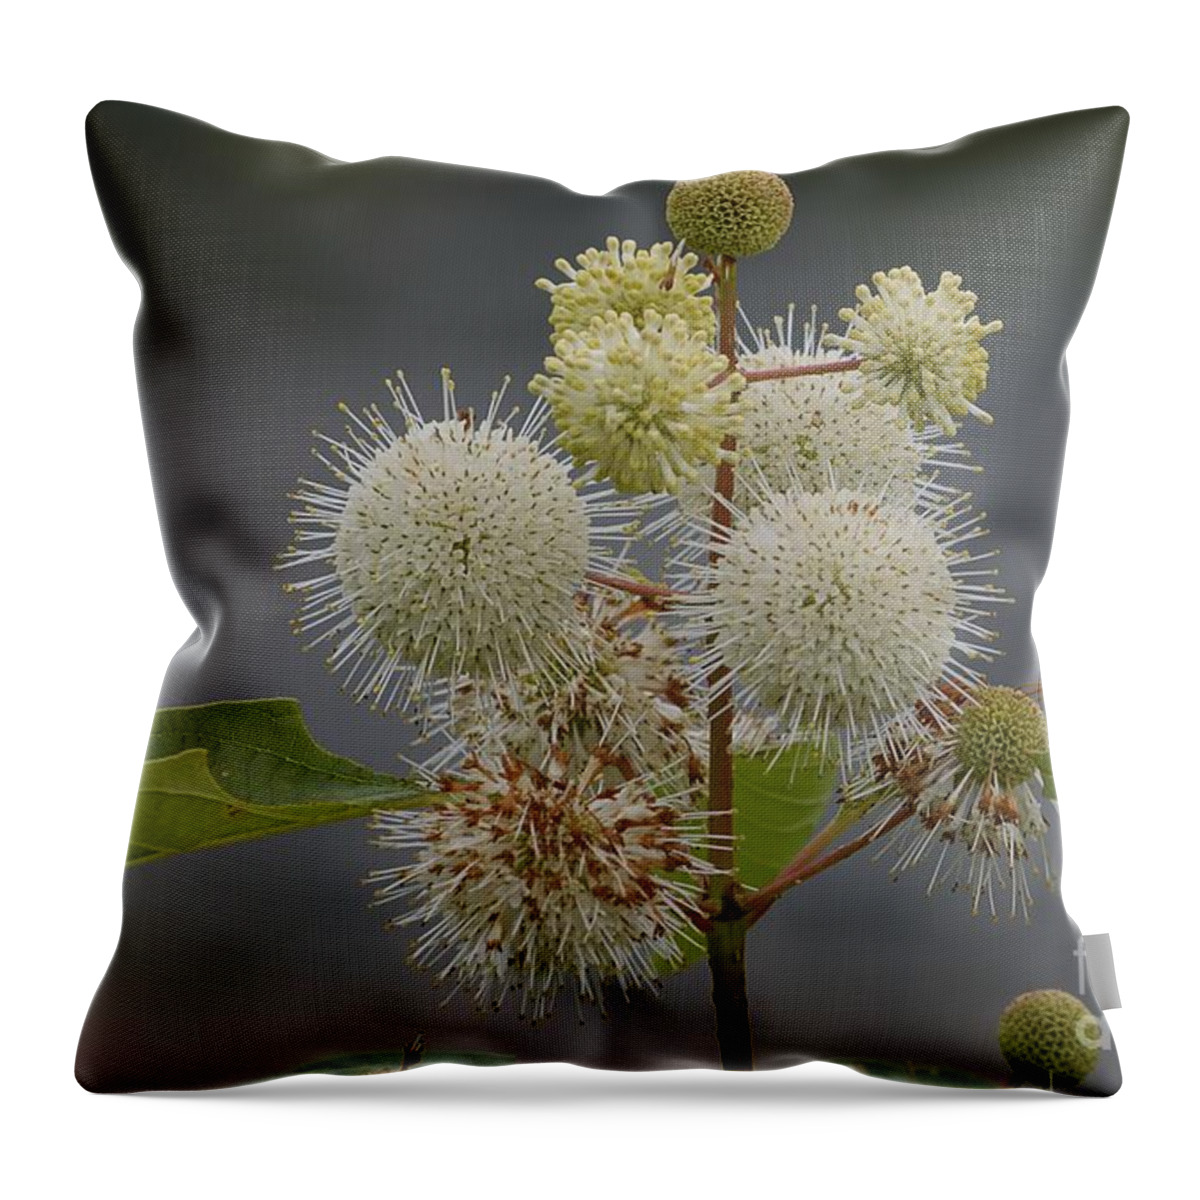 White Flowers Throw Pillow featuring the photograph Buttonbush by Randy Bodkins